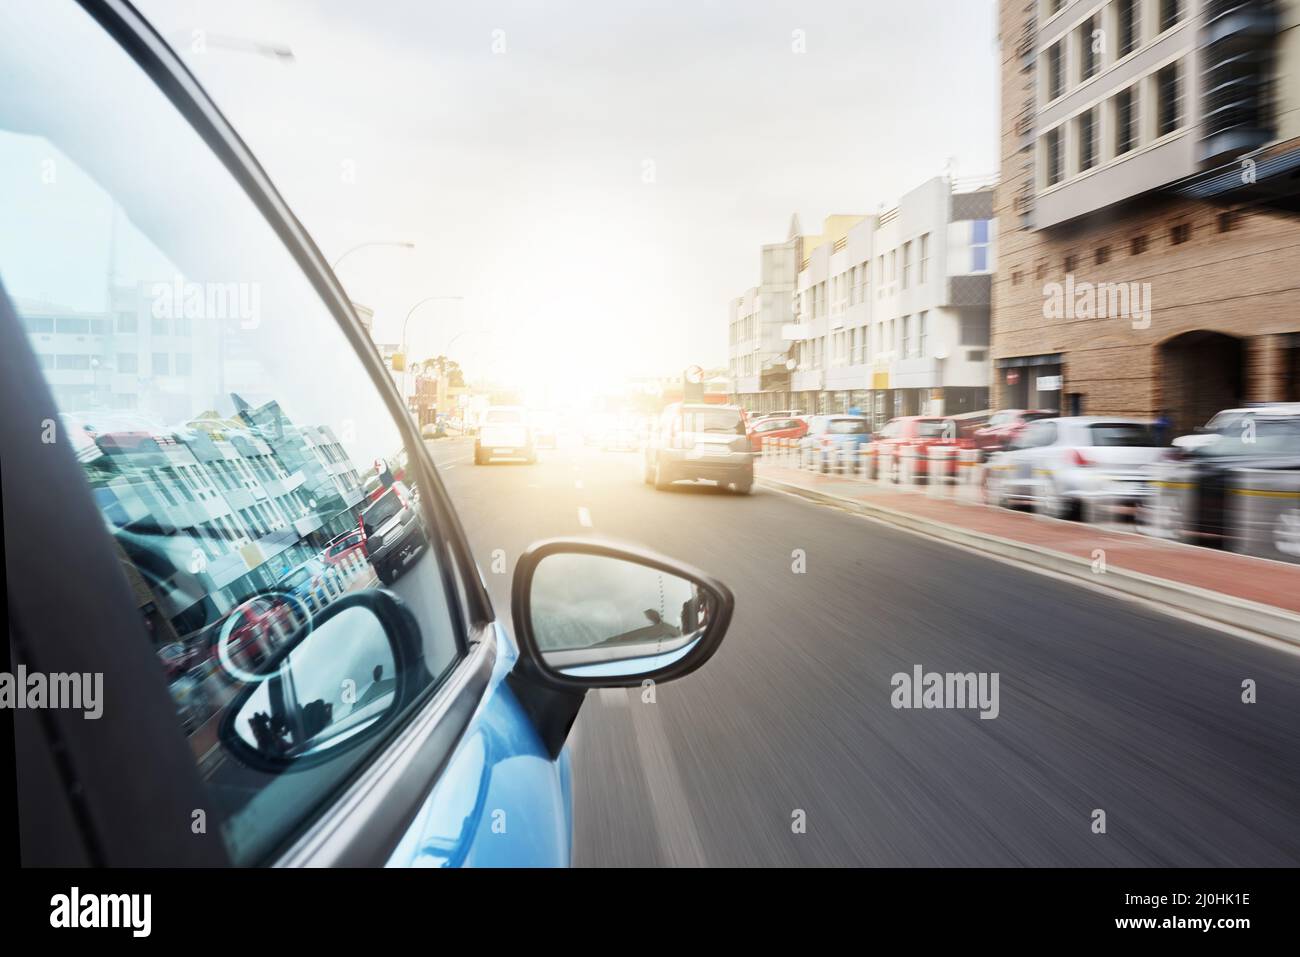 Always on the move. Shot of a car driving on a road. Stock Photo